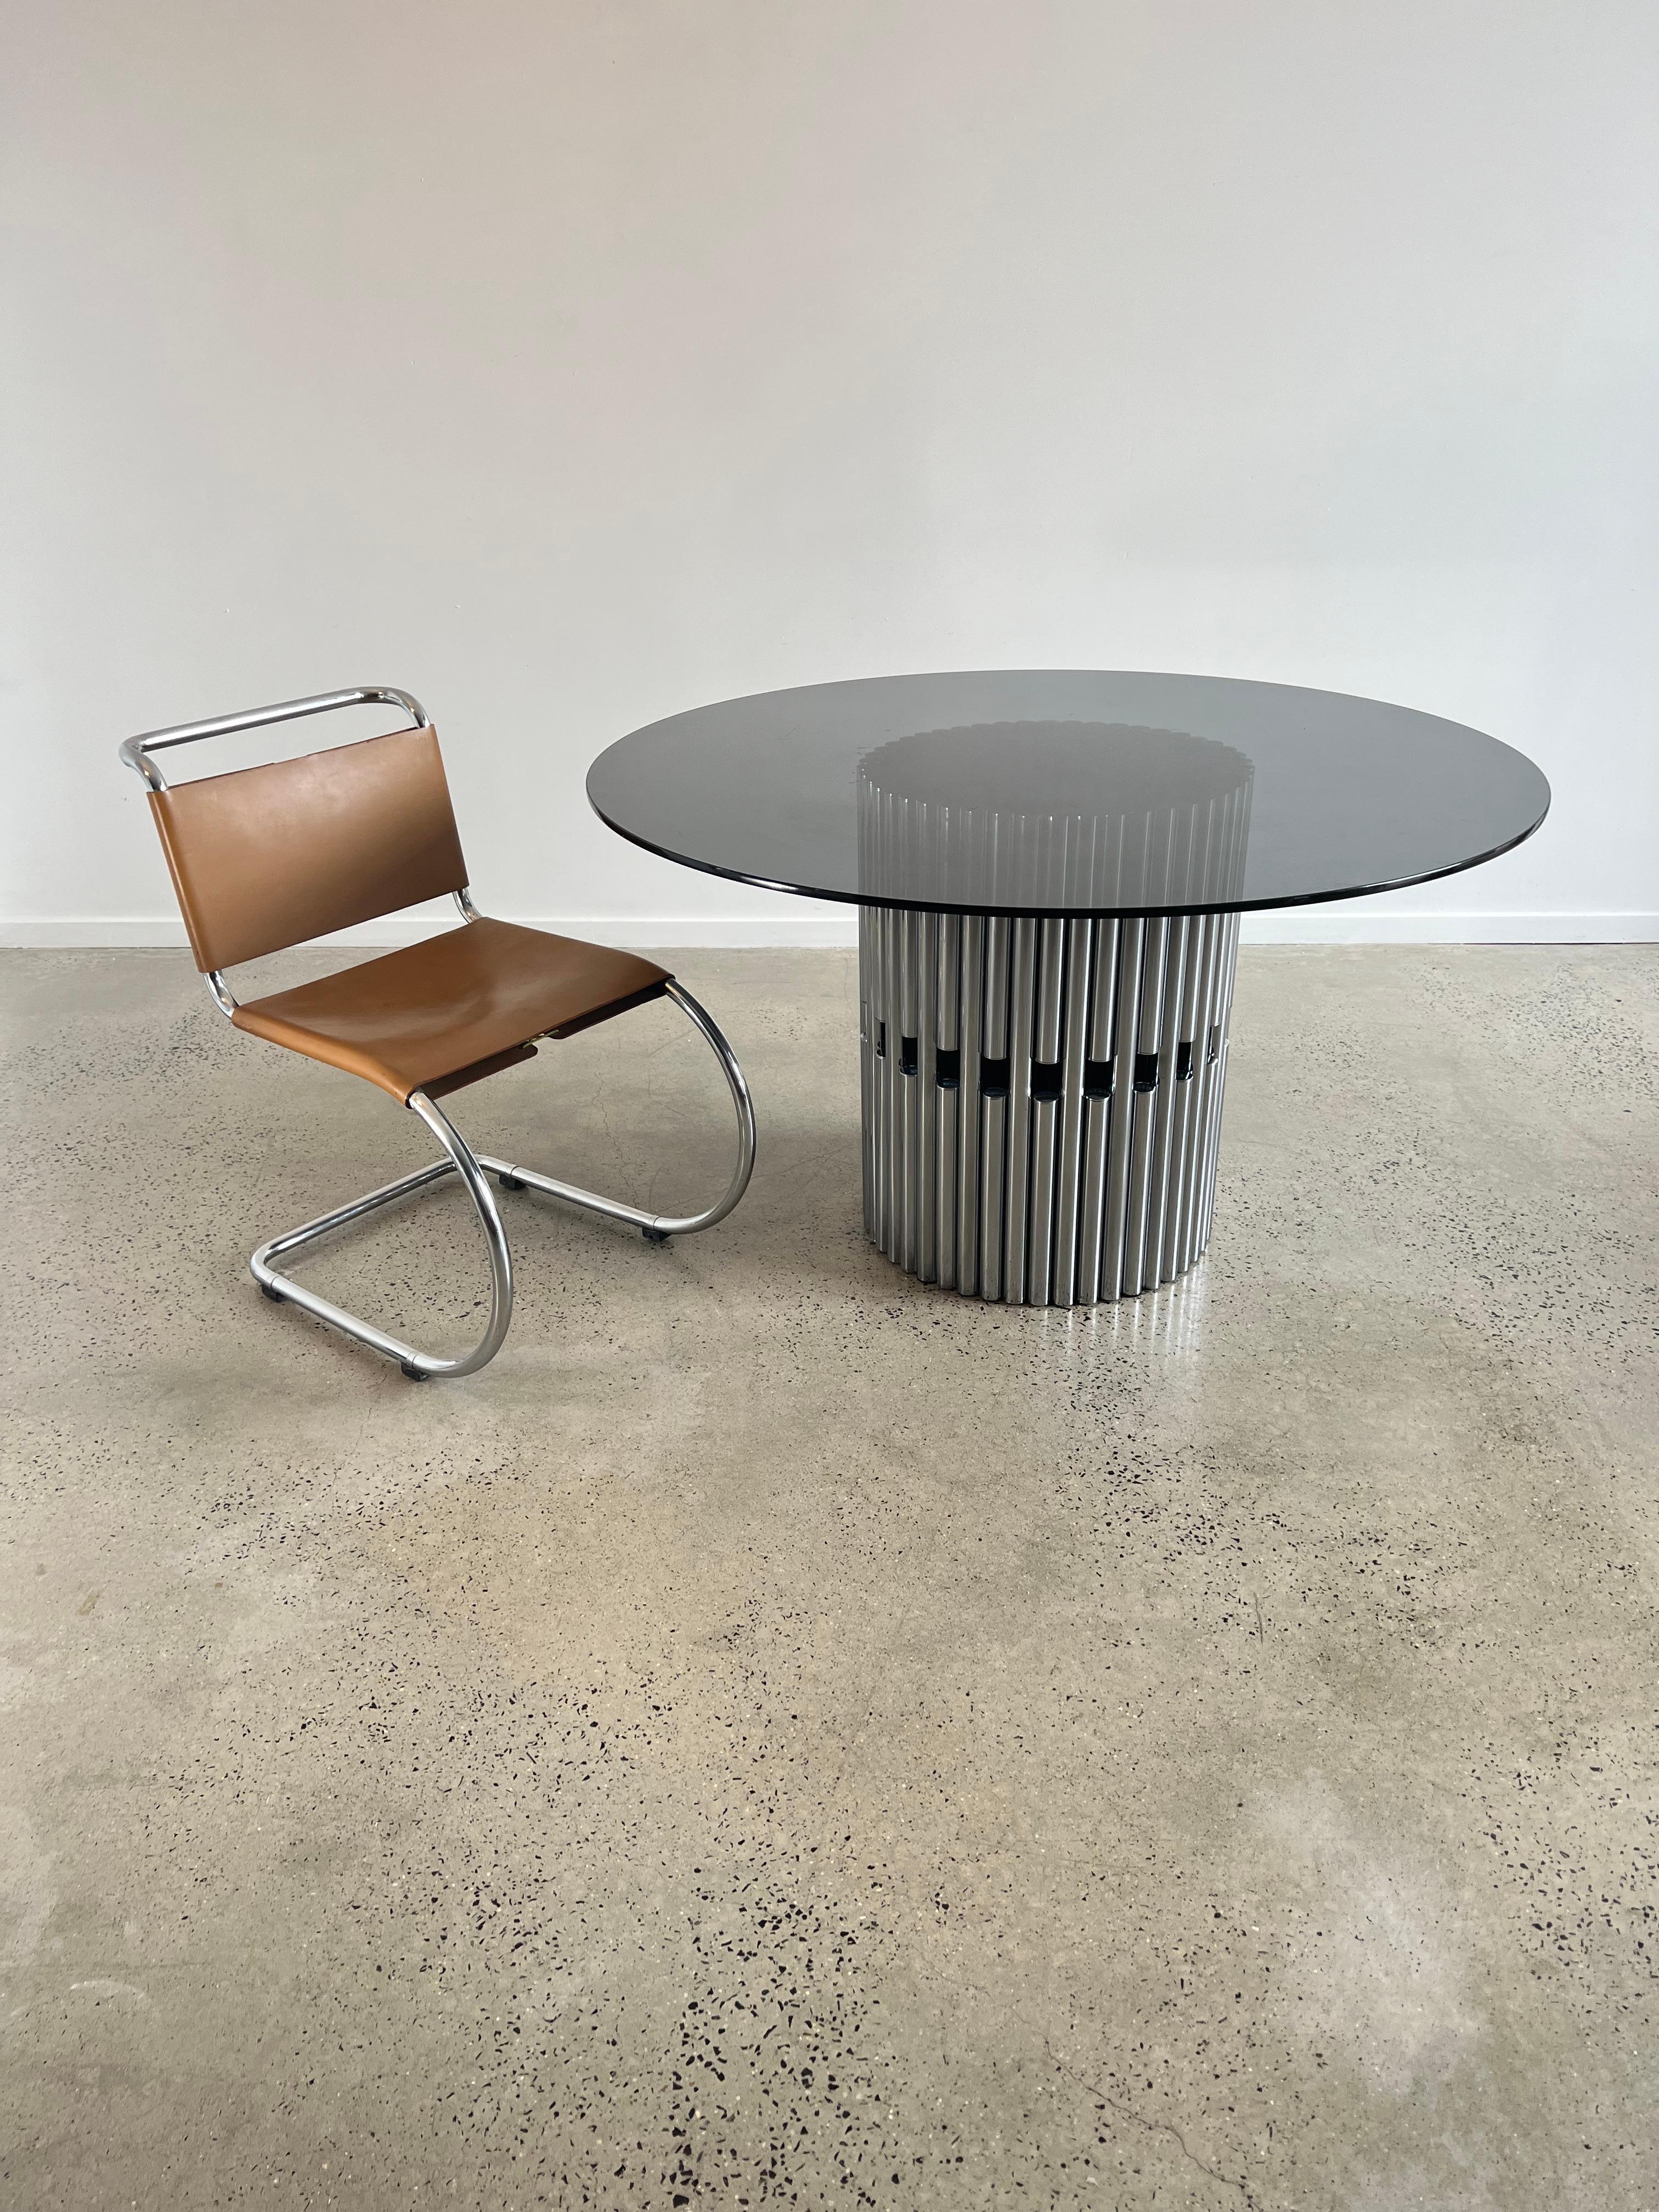 These iconic MR10 dining chairs designed by Ludwig Mies Van der Rohe and manufactured by Knoll International are cherished for their sleek design, high quality of metal work and
 overall comfort.